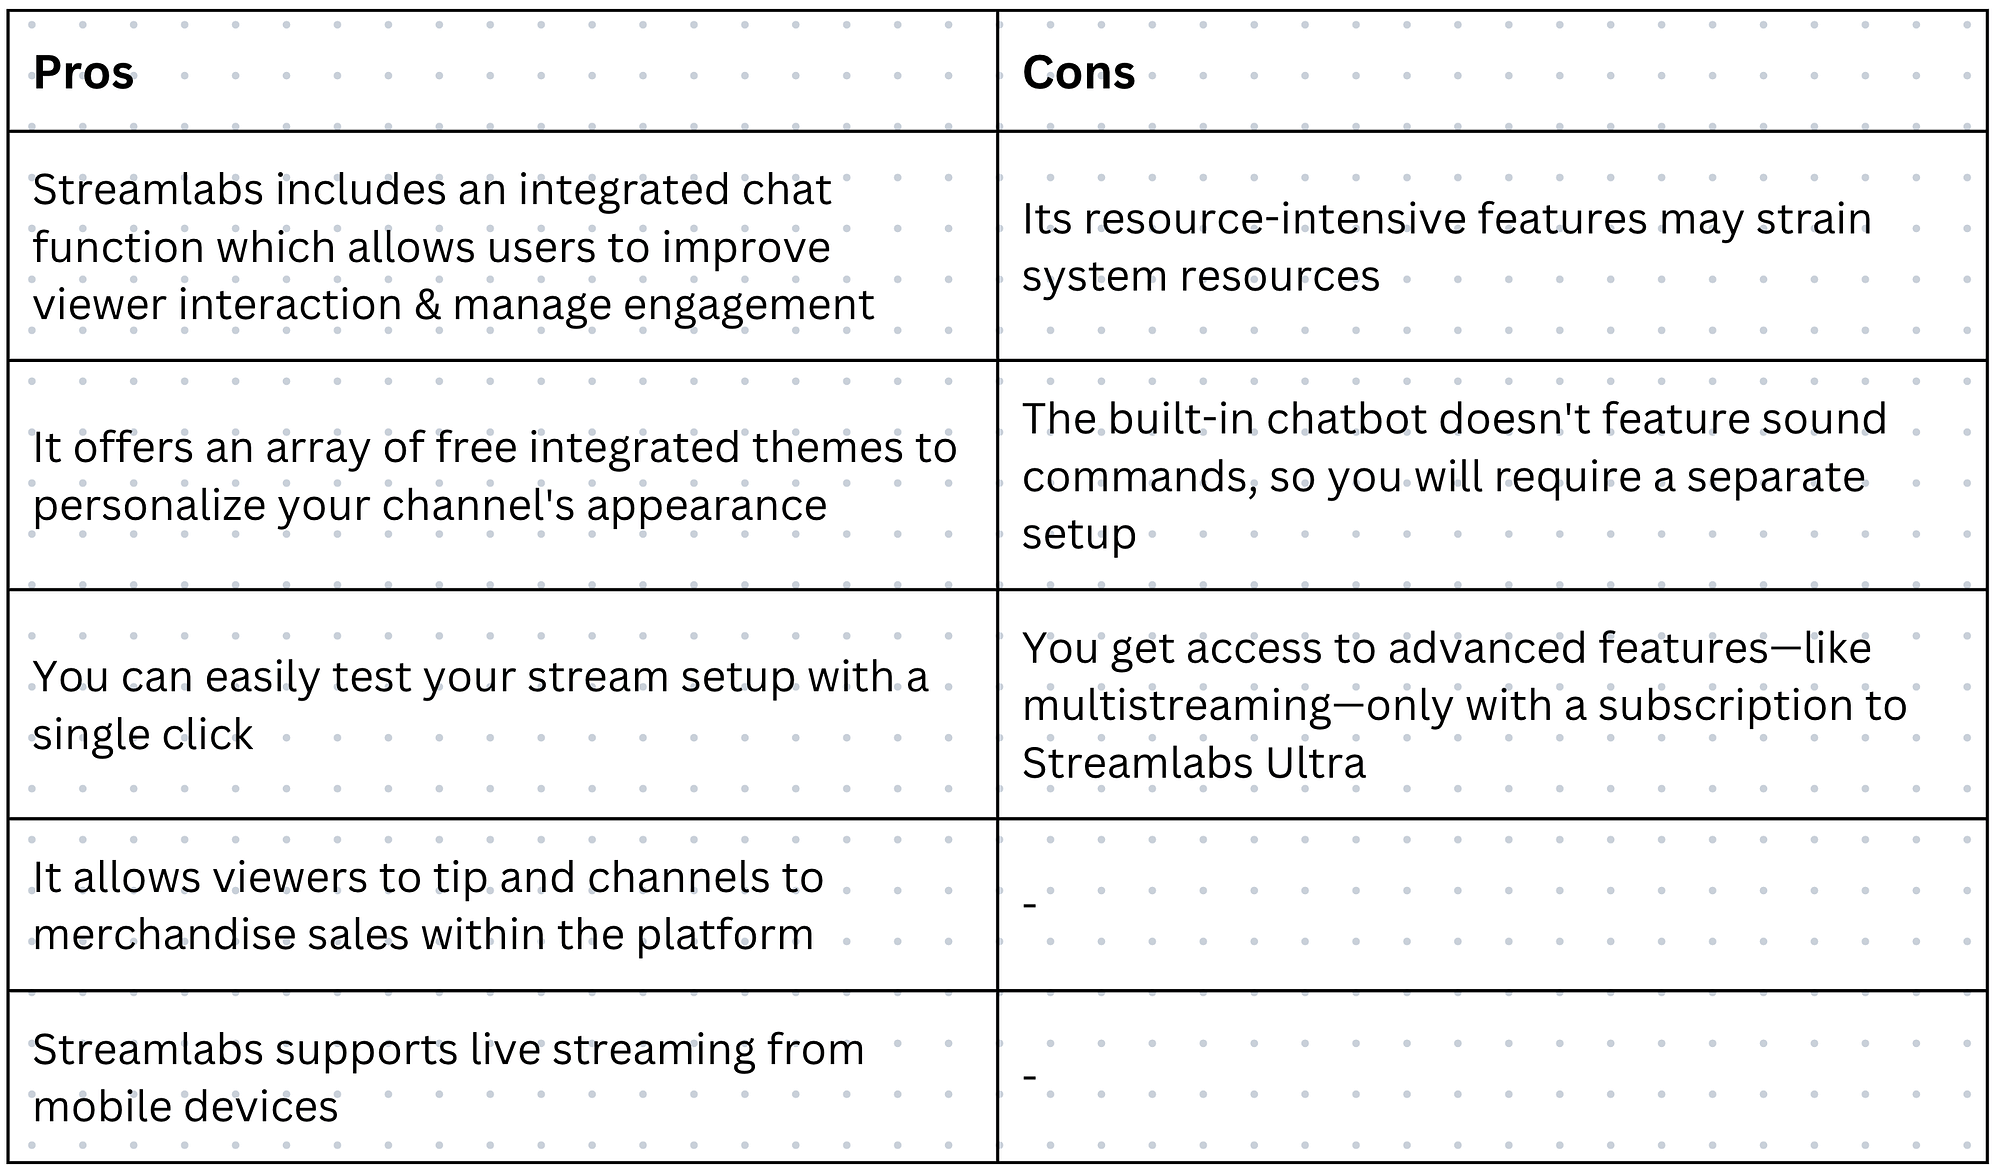 Pros and Cons of Streamlabs